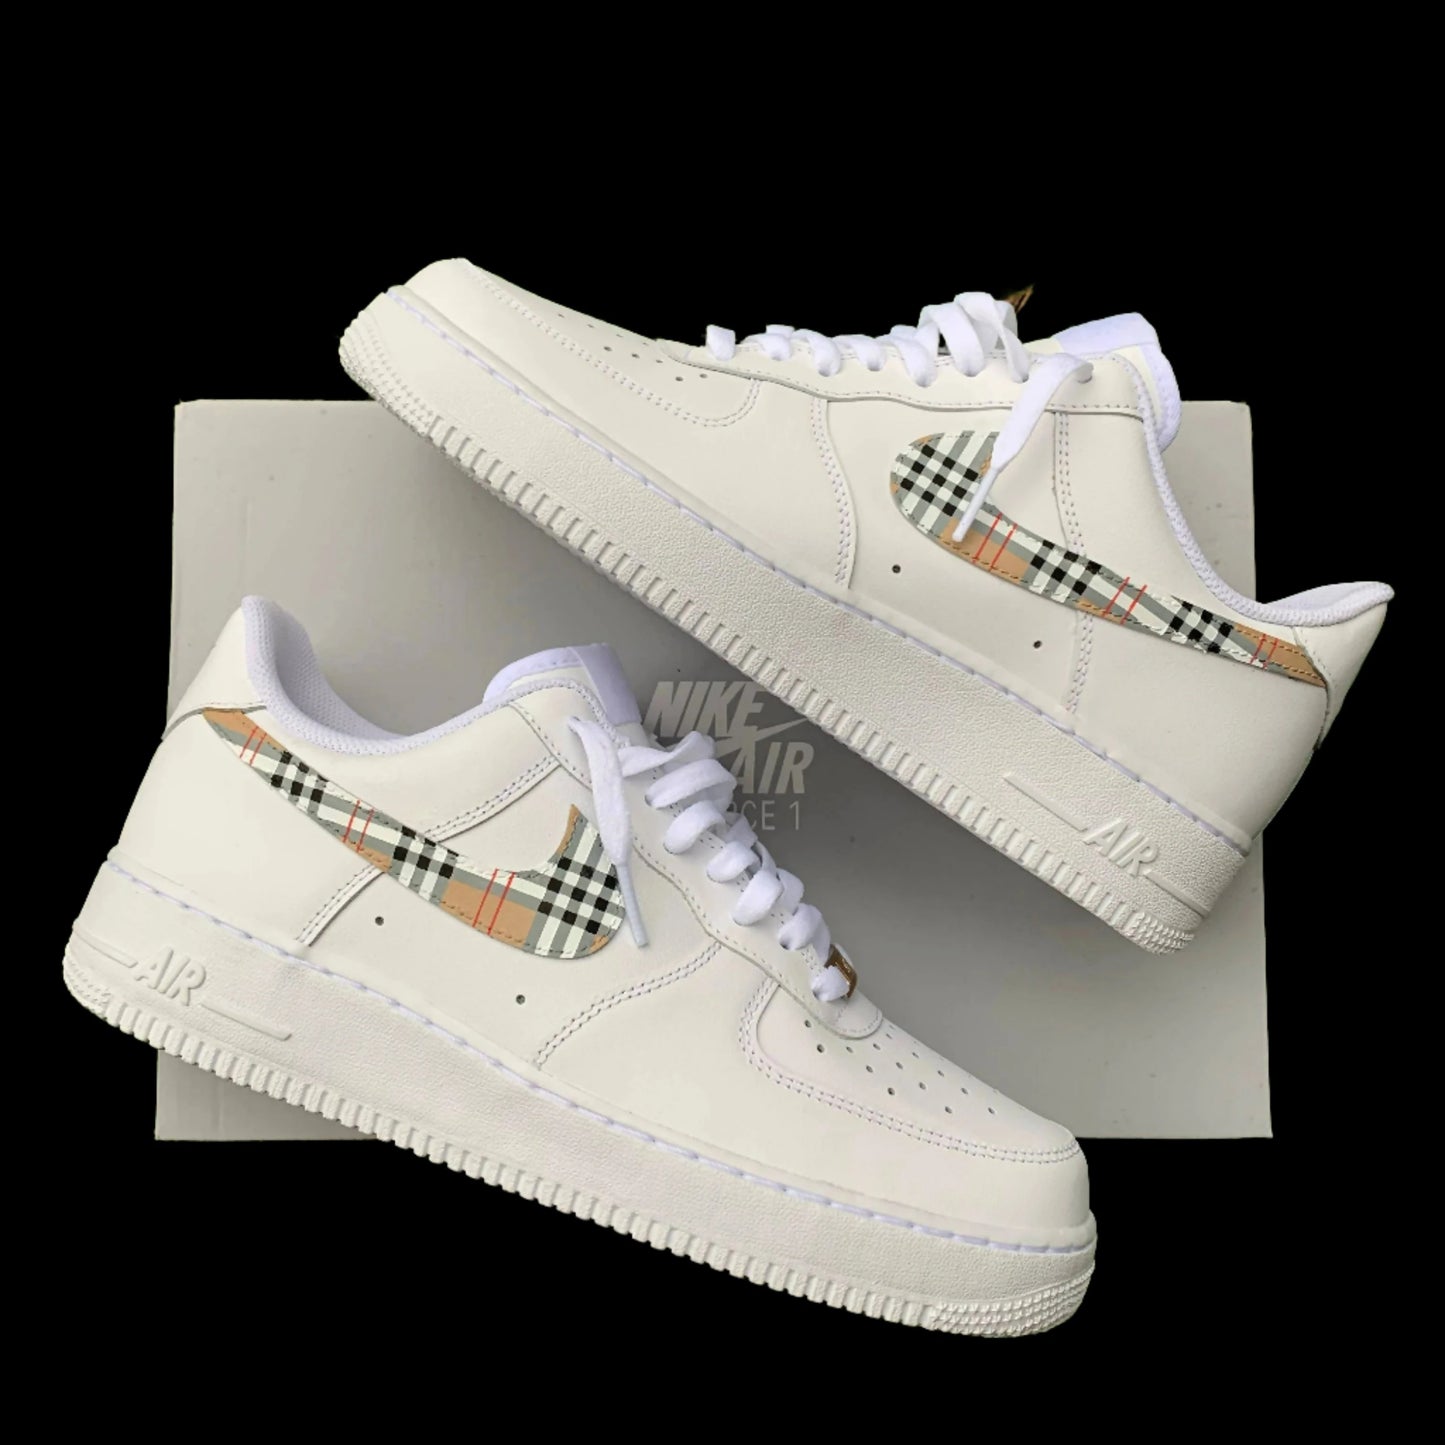 CLASSIC BURBERRY WRAP - AIR FORCE 1 Low